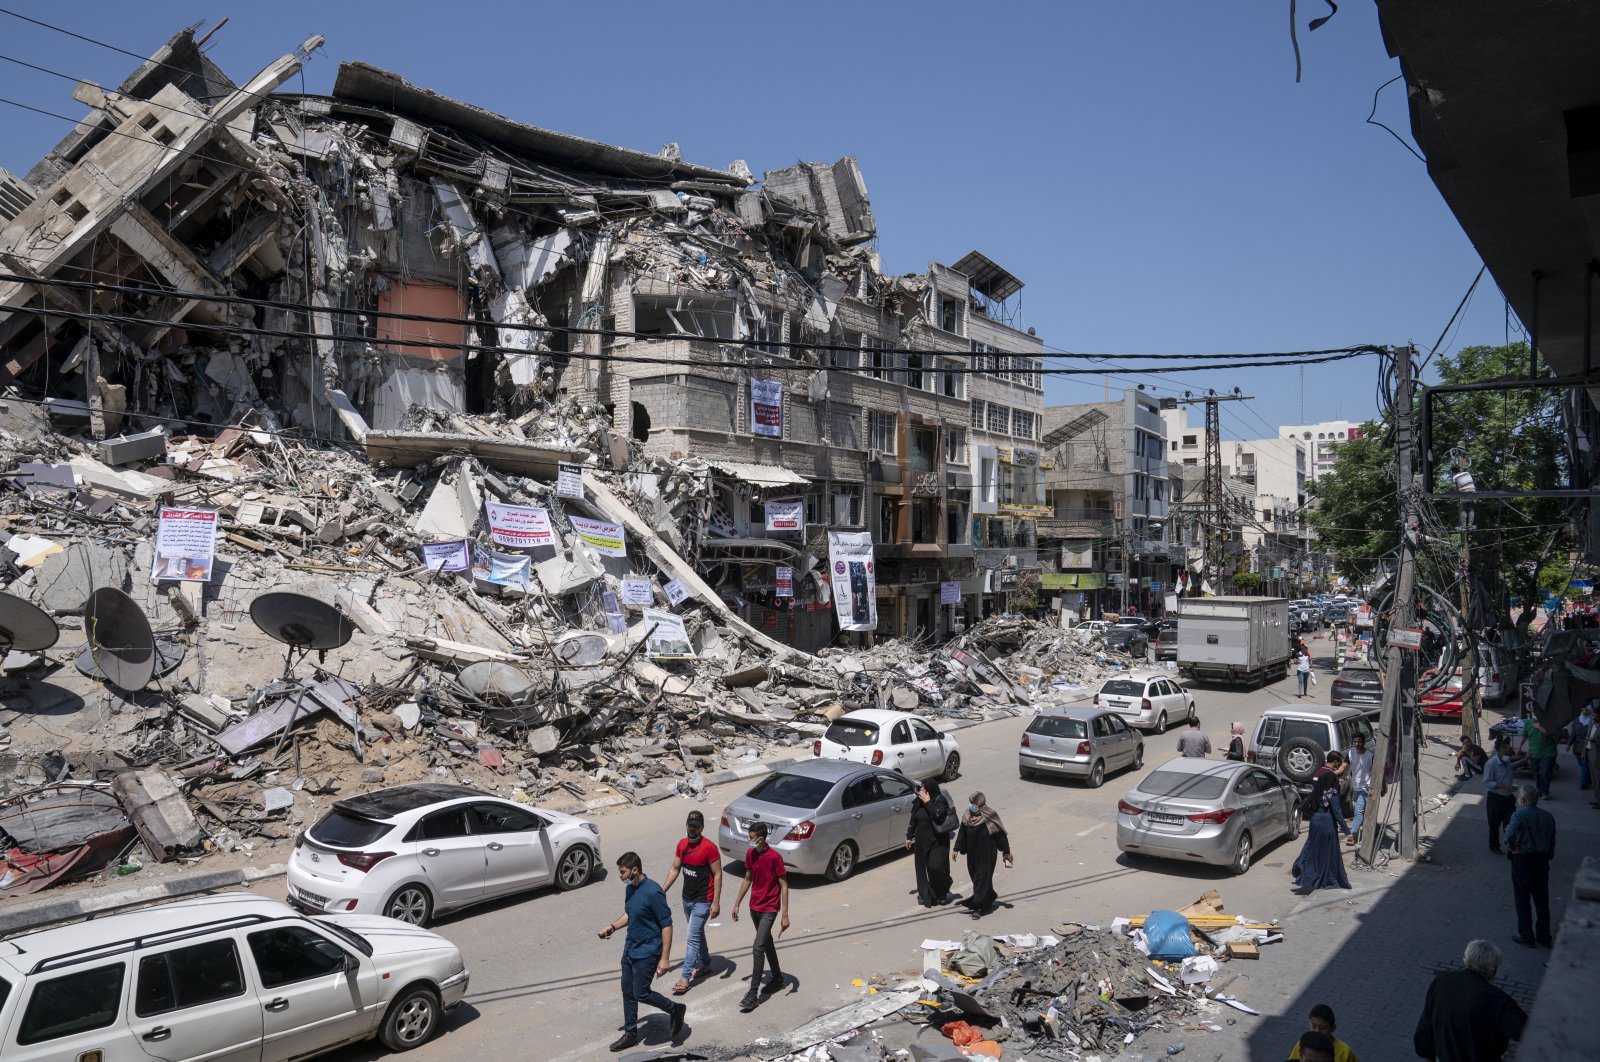 Motorists and pedestrians move past a building destroyed by an airstrike prior to a cease-fire that halted the 11-day war between Gaza's Hamas rulers and Israel in Gaza City, the Gaza Strip, May 25, 2021. (AP Photo)